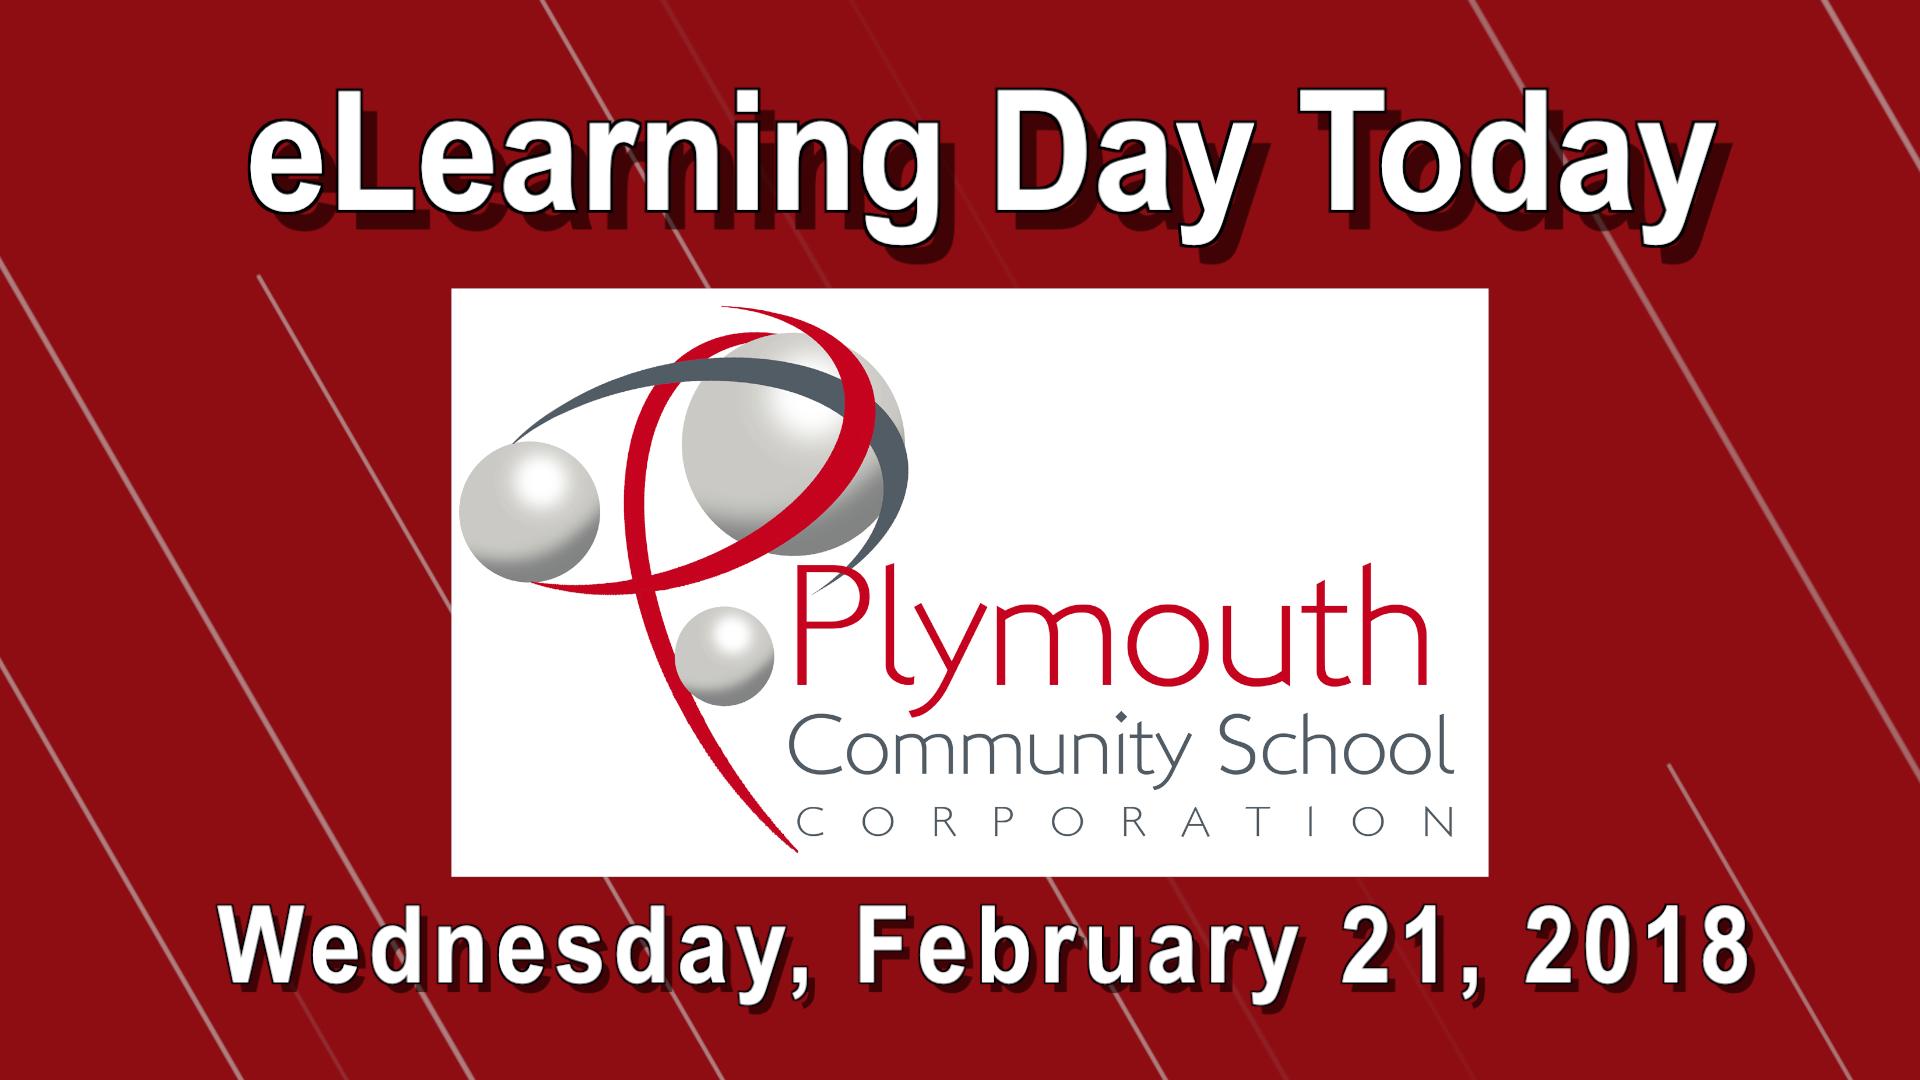 eLearning Day Today February 21, 2018